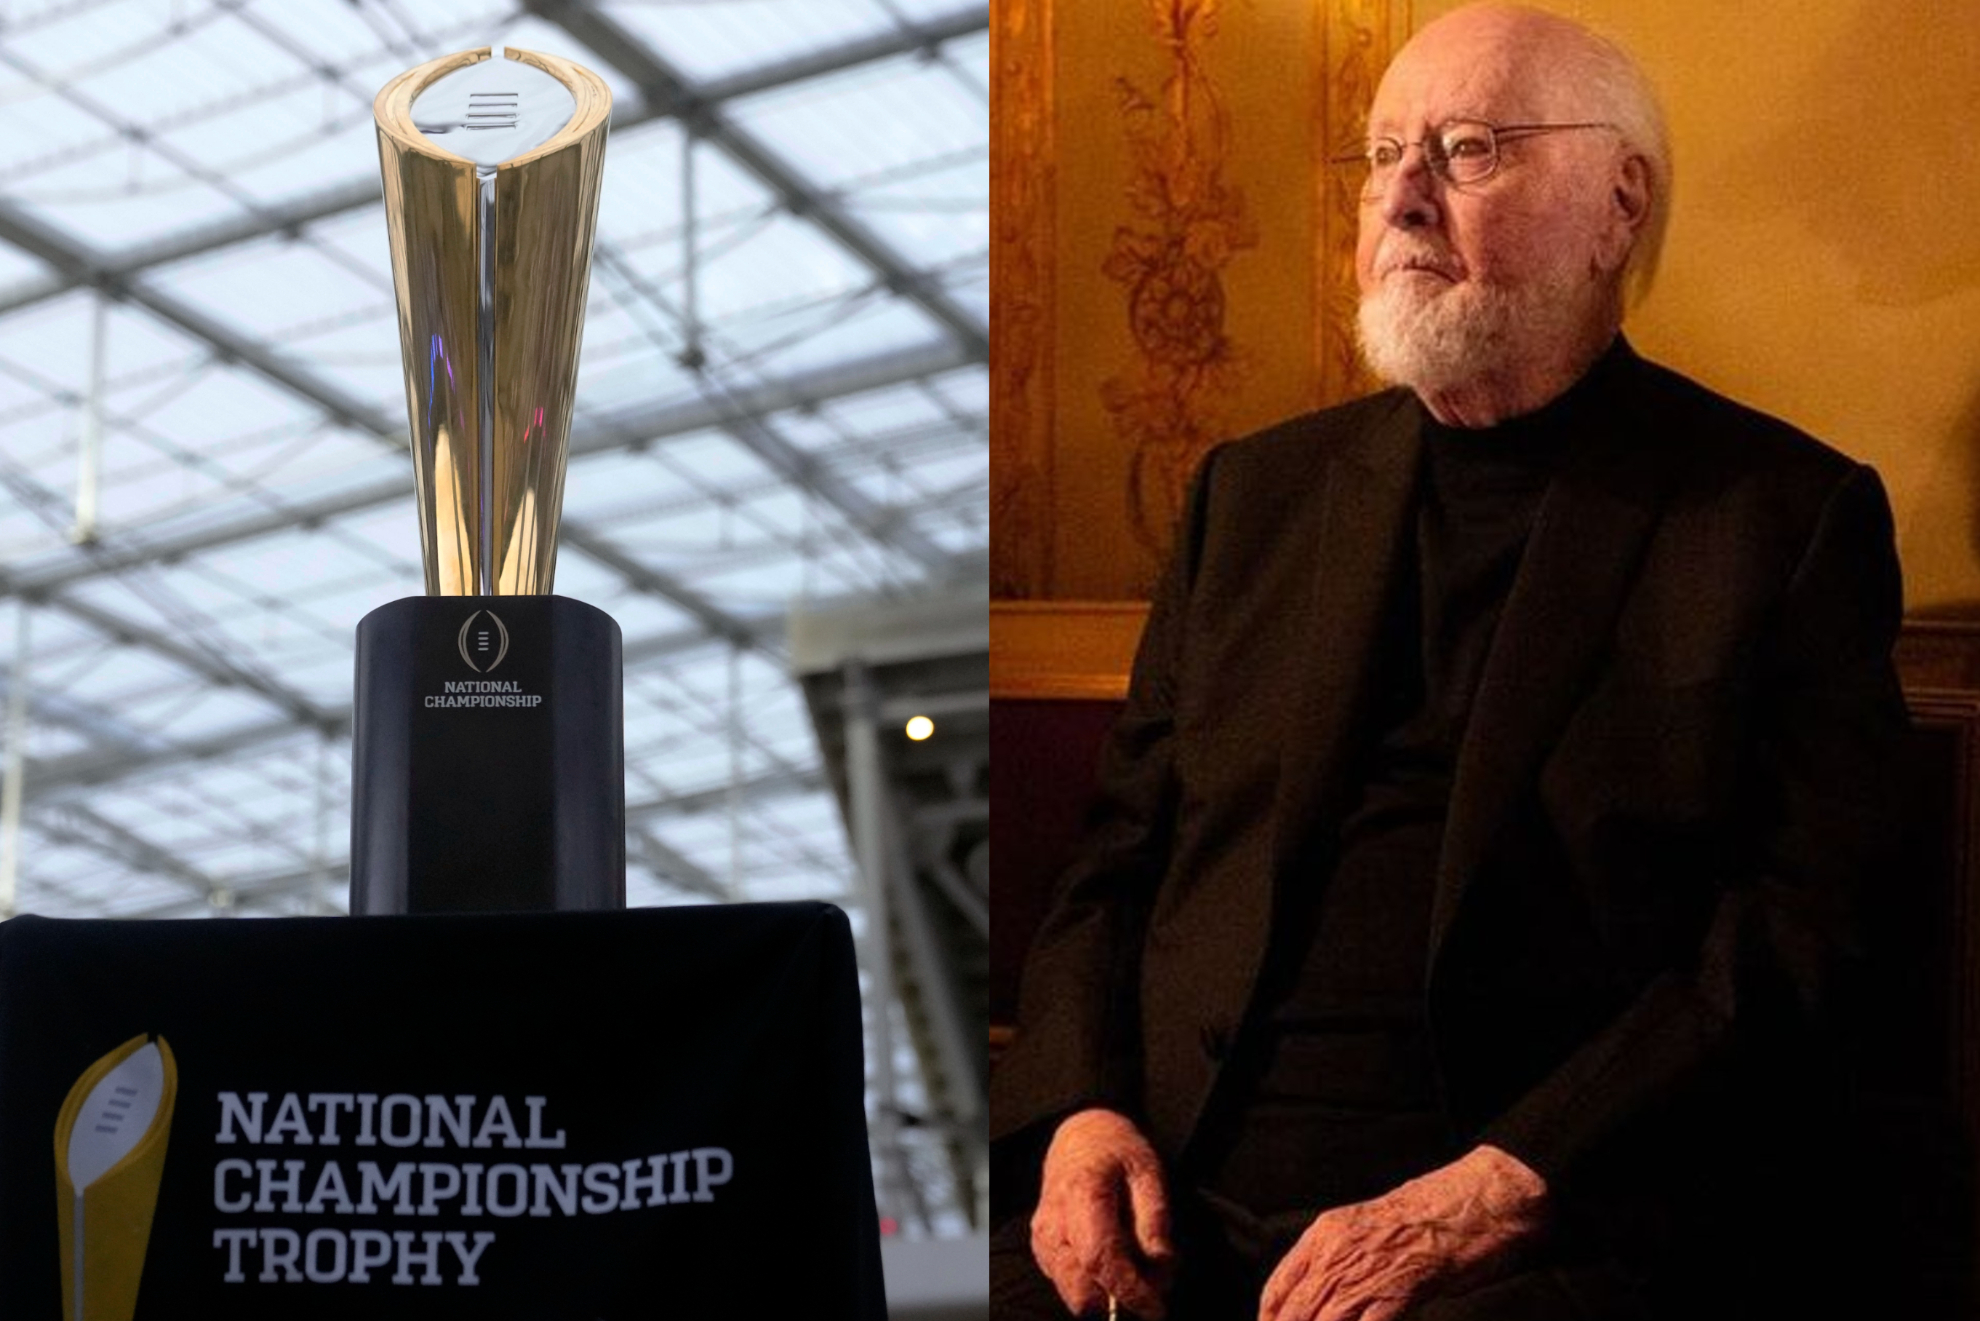 National Championship Trophy and legendary film composer John Williams.